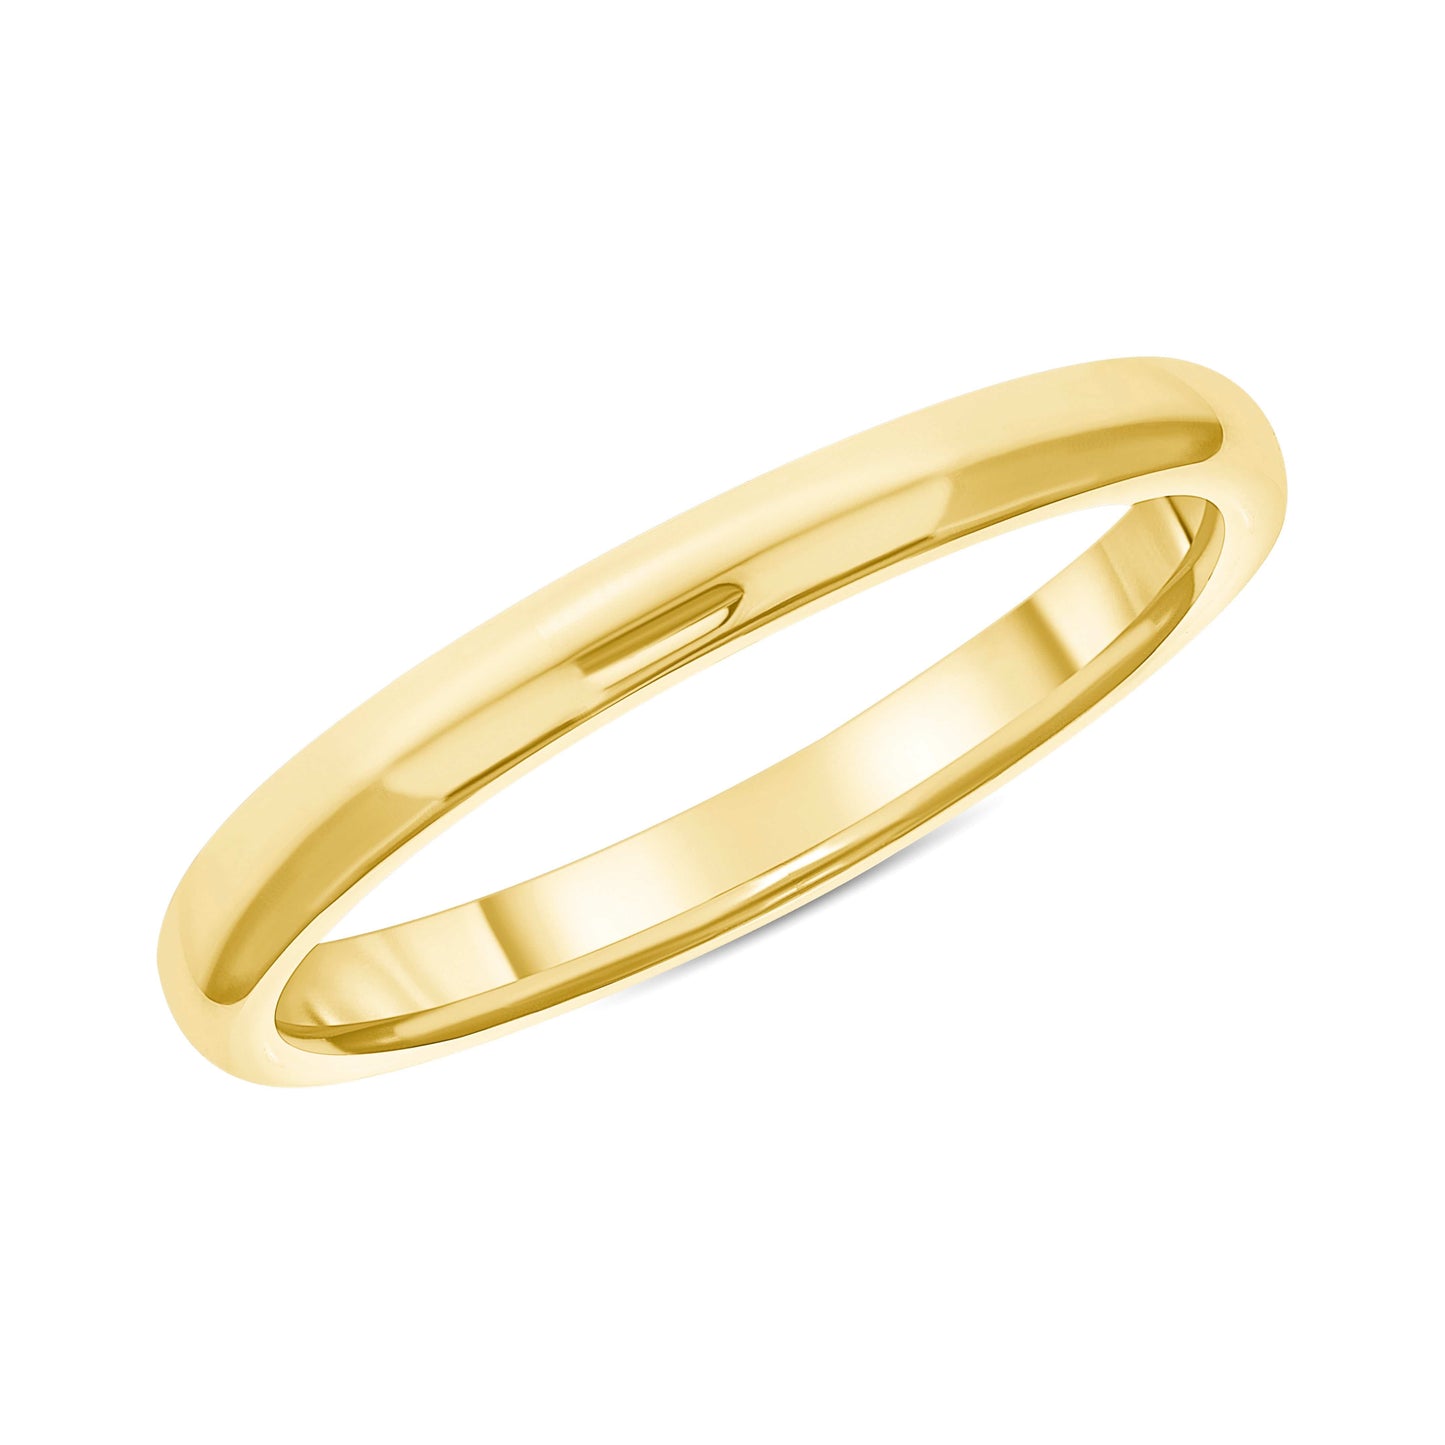 9ct Gold Russian Wedding Ring - 2mm - R17541 | F.Hinds Jewellers